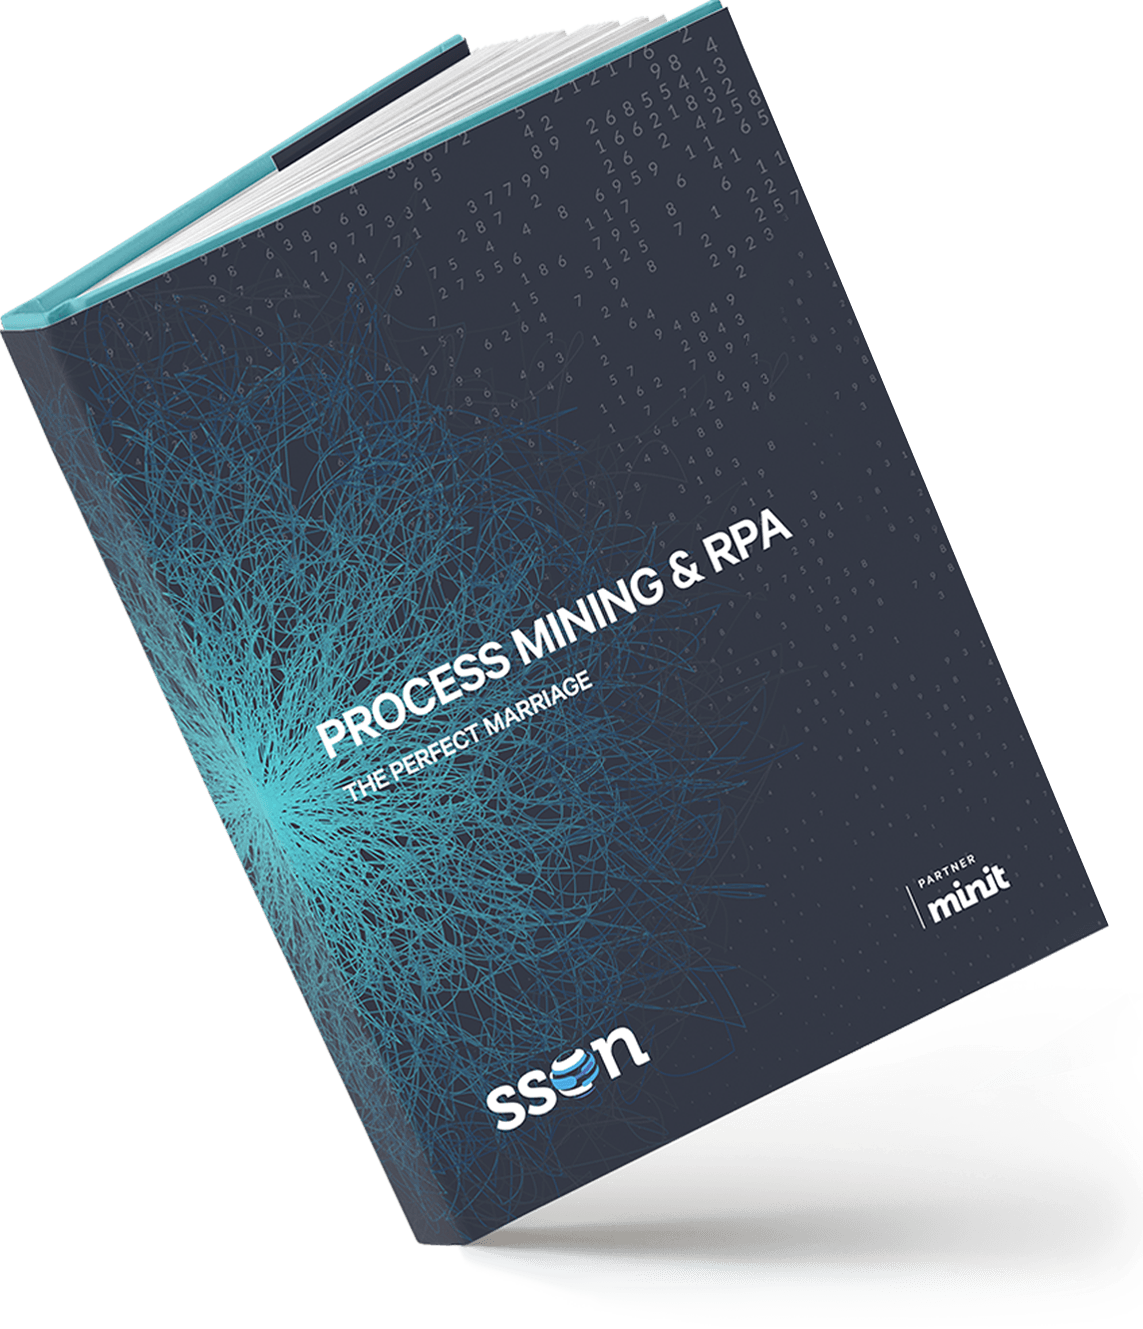 Process Mining and RPA: The Perfect Marriage